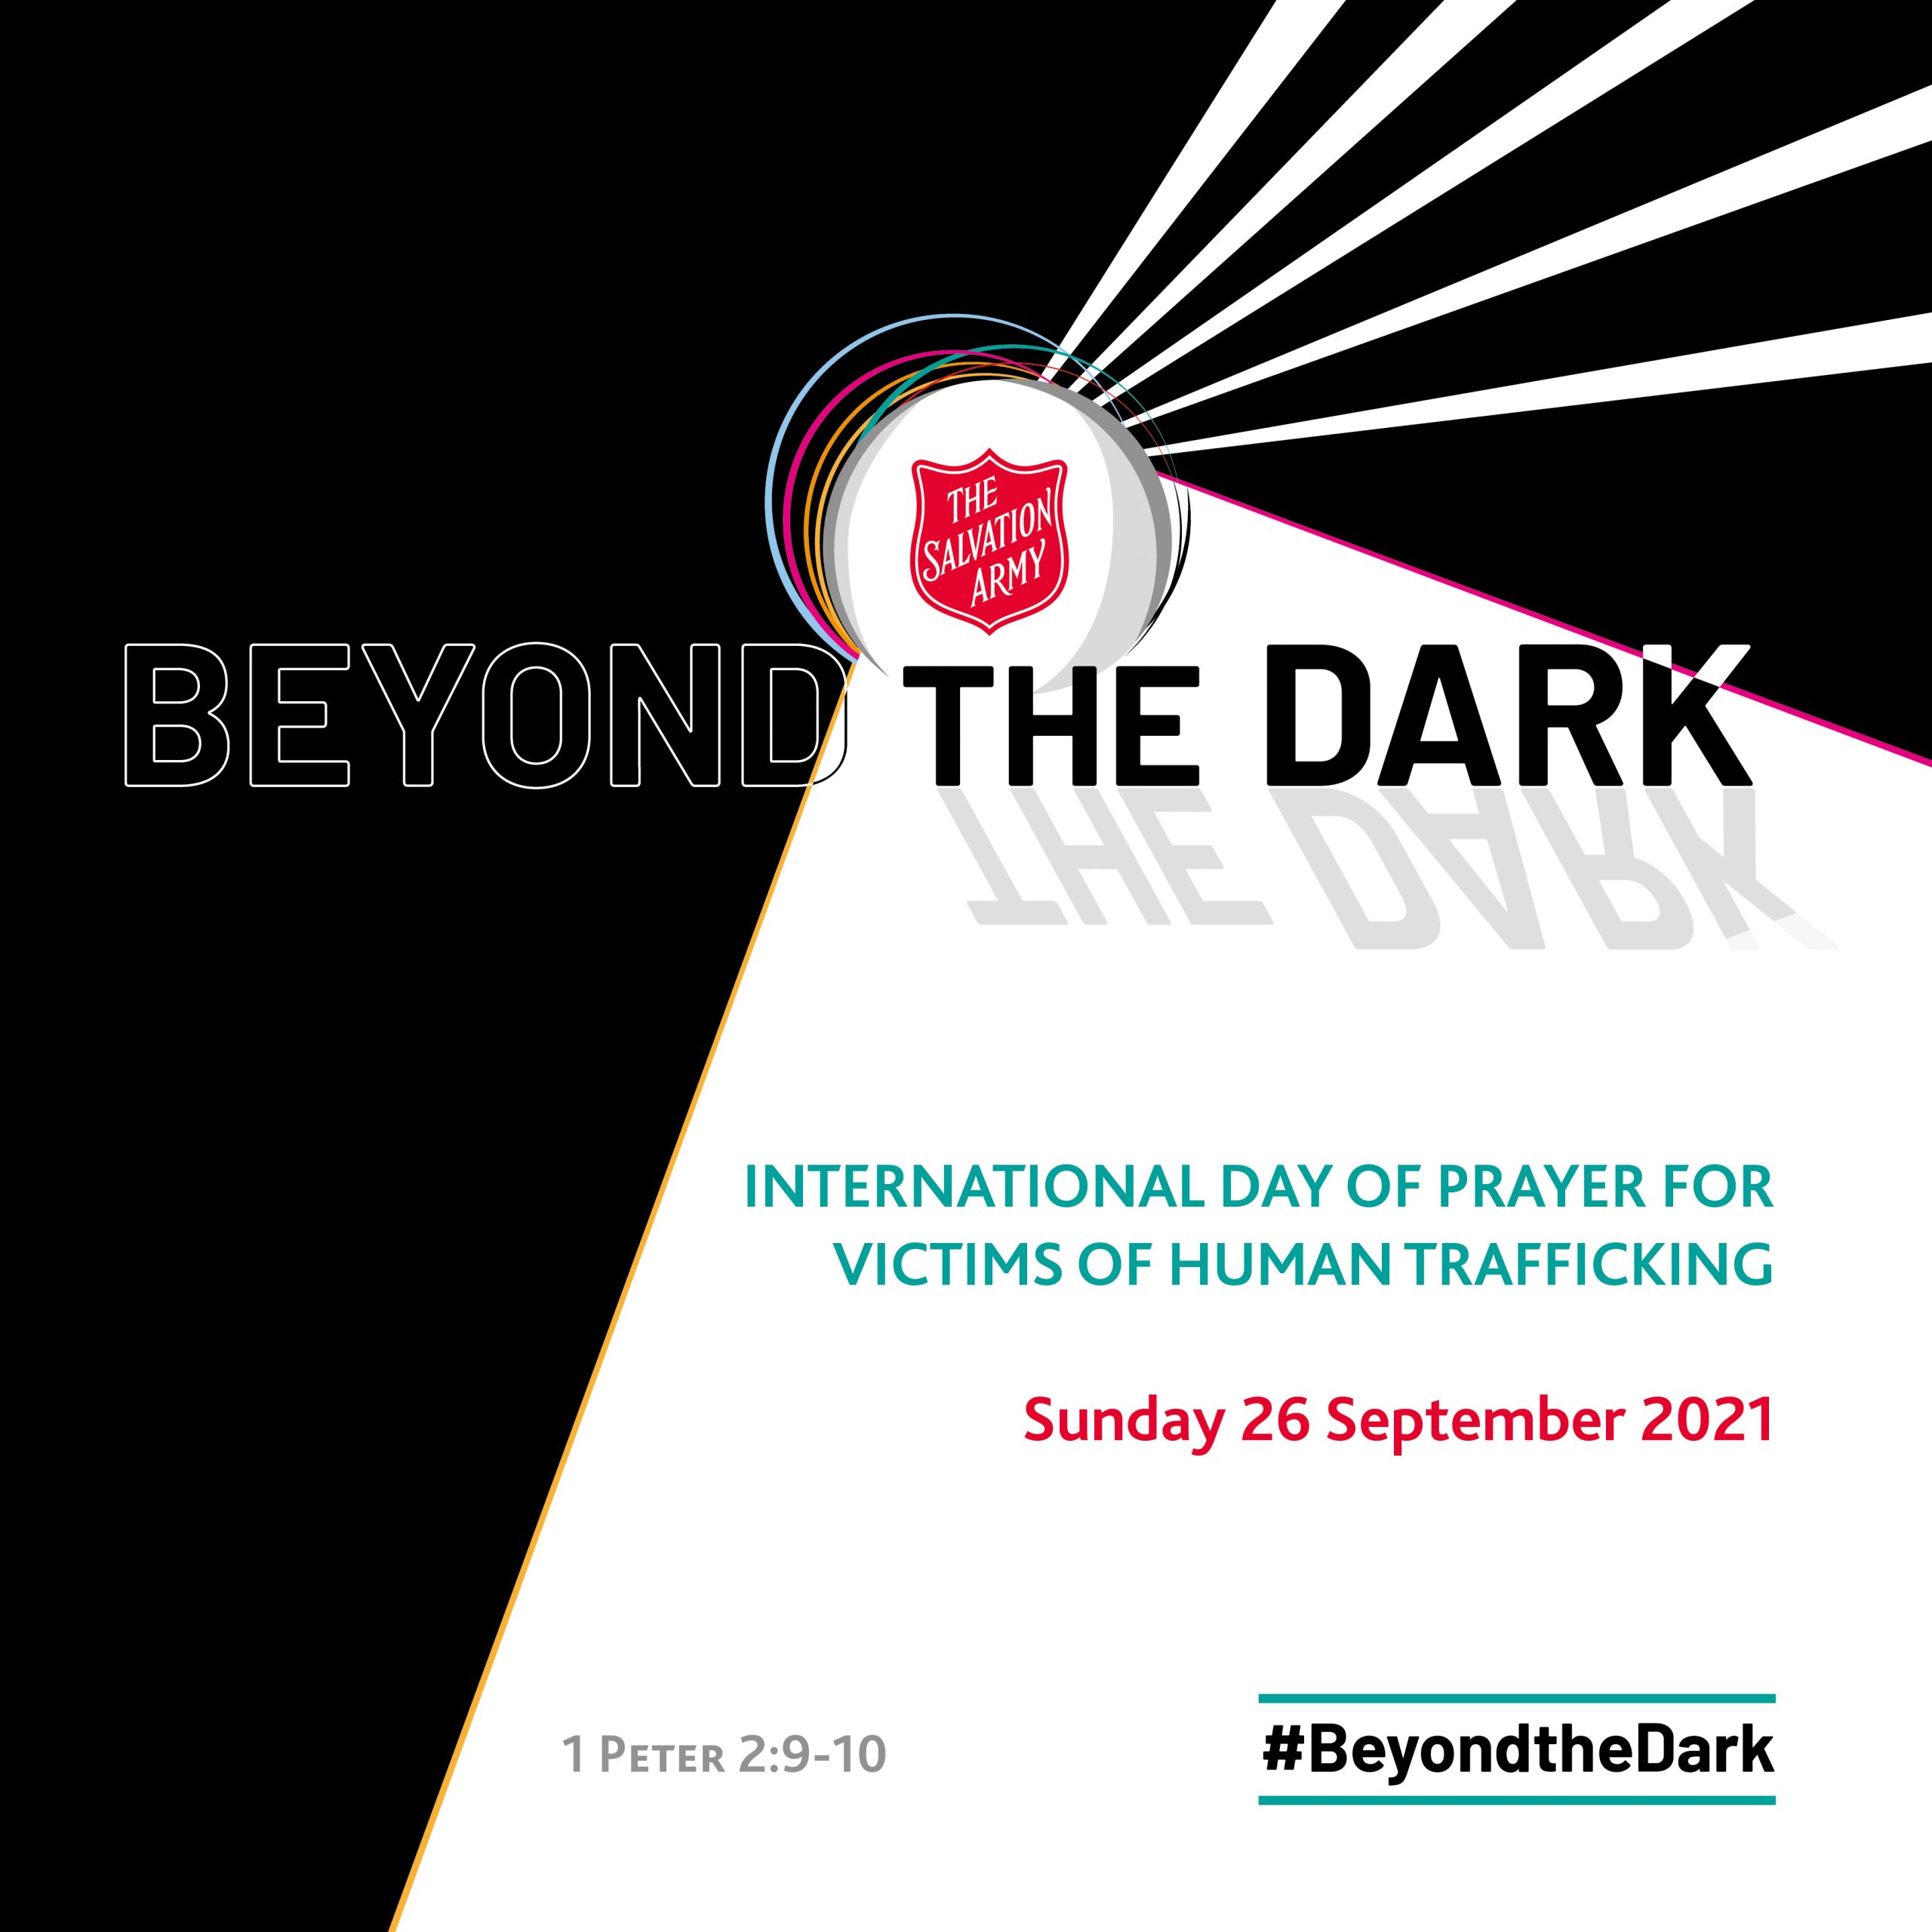 Linked to Beyond the Dark Social Media/Logo Page